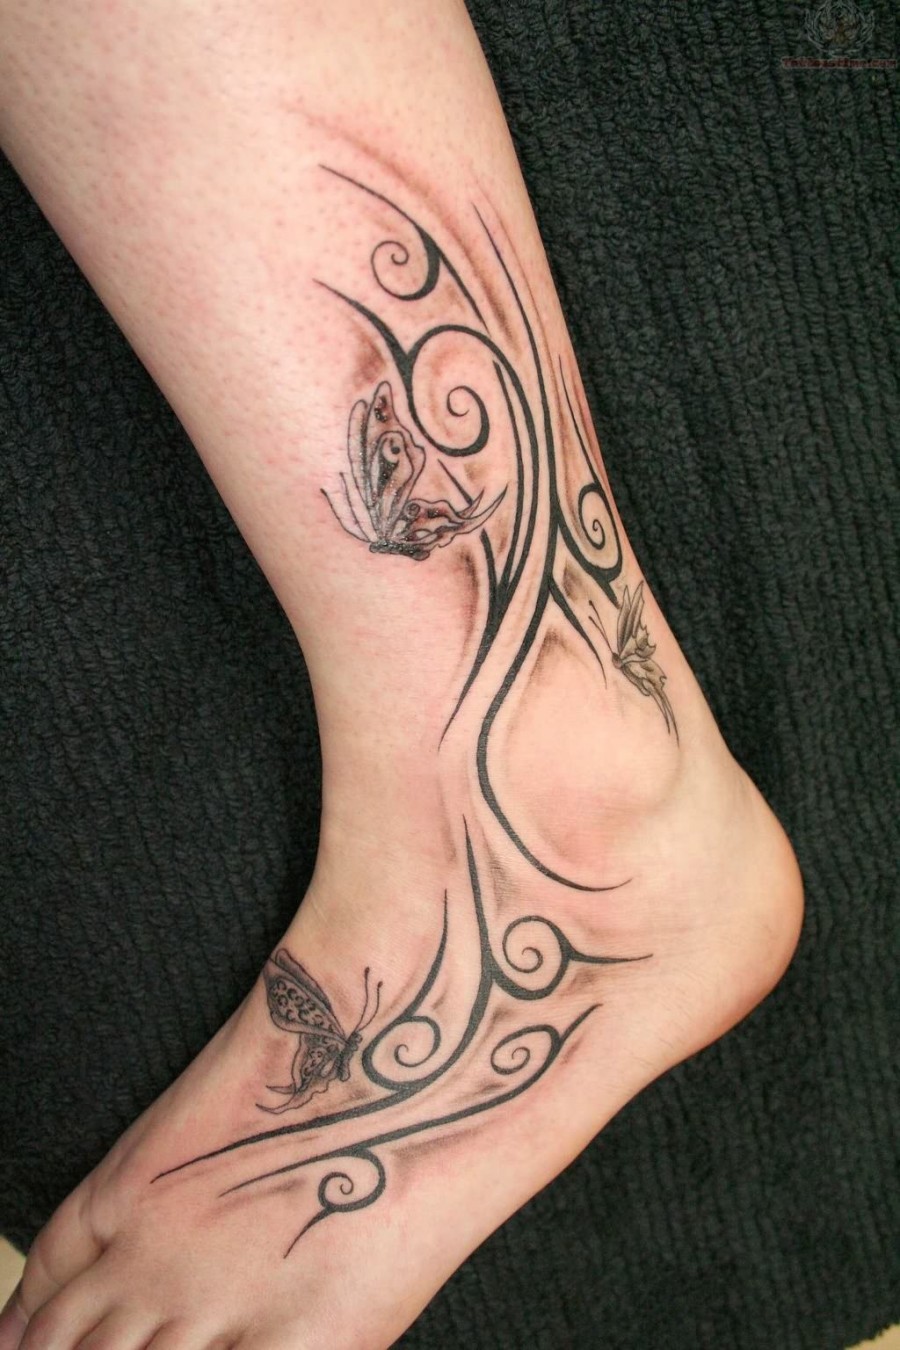 Beautiful Japanese Butterfly Tribal Tattoo Design on Ankle